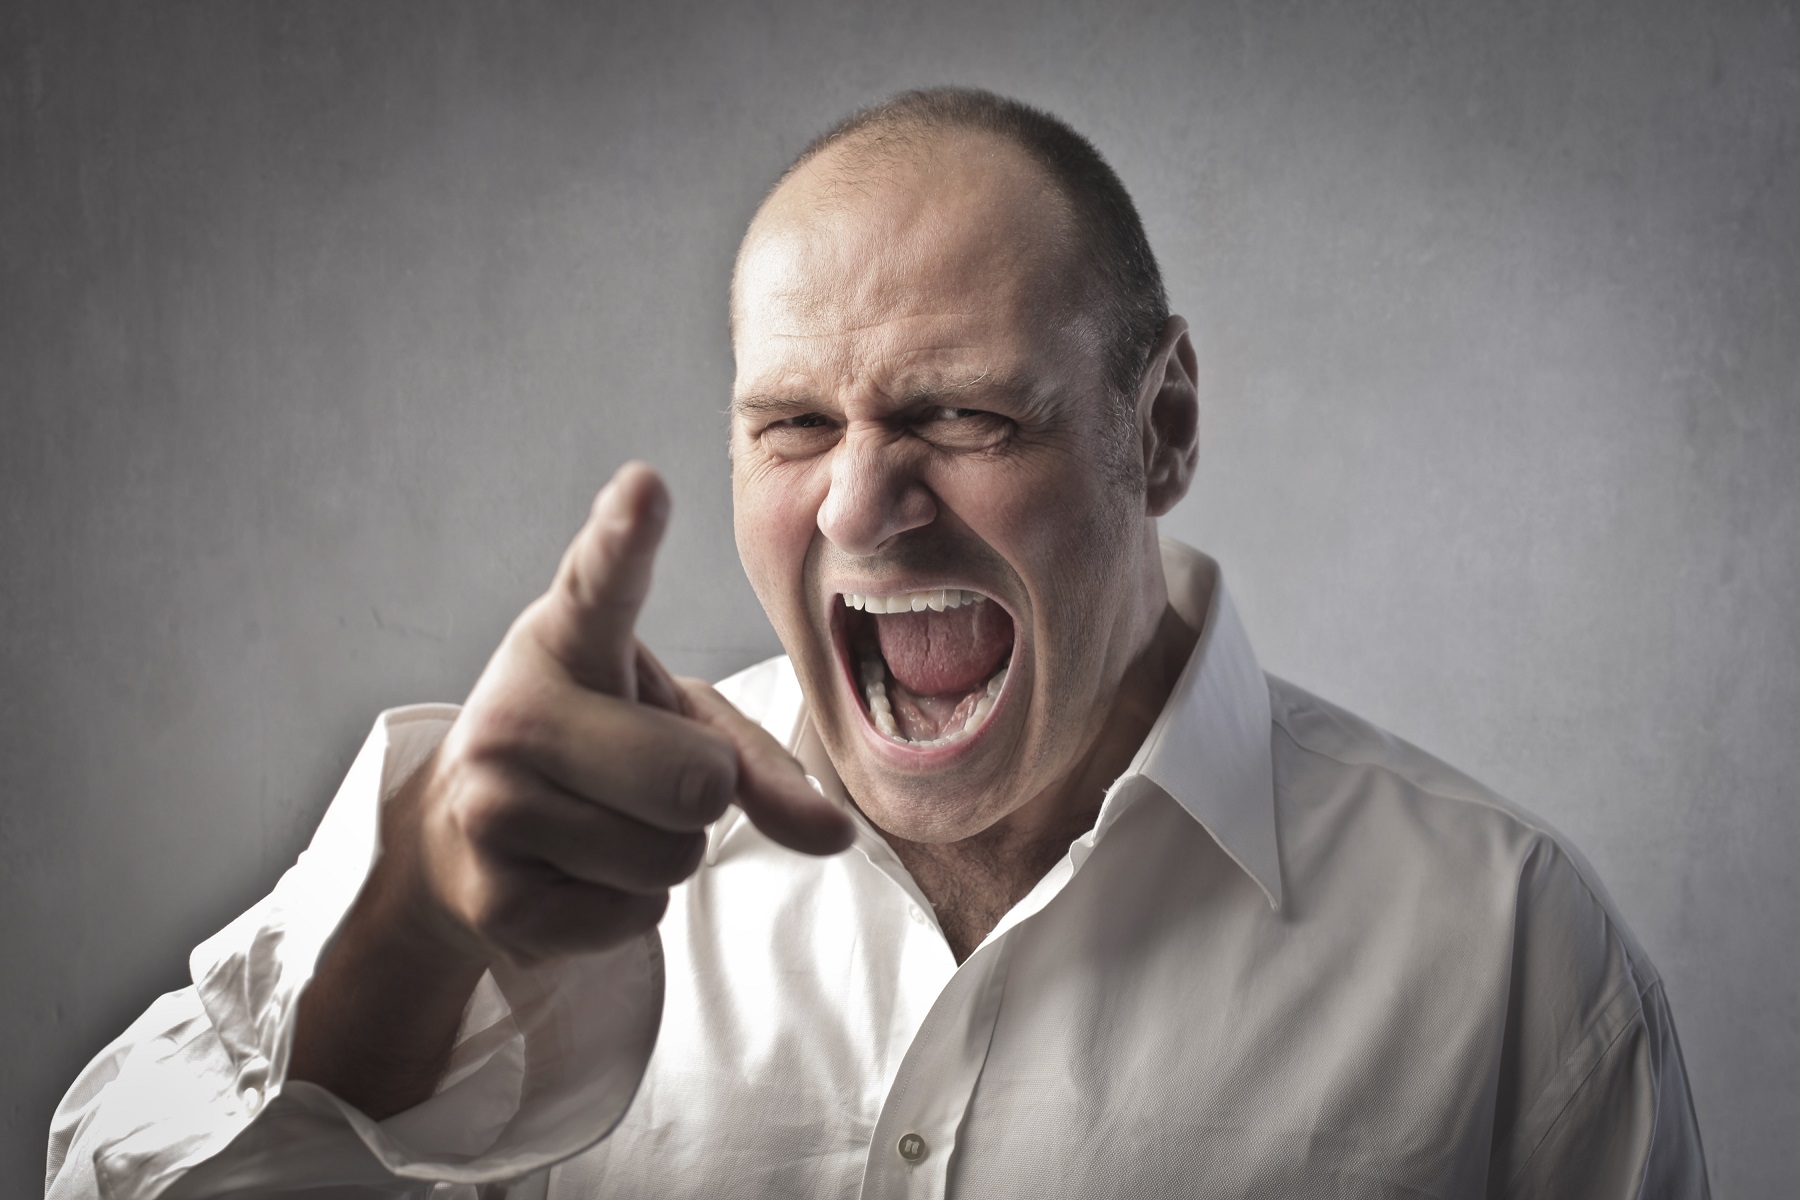 Angry man wearing white shirt is shouting and pointing with finger.